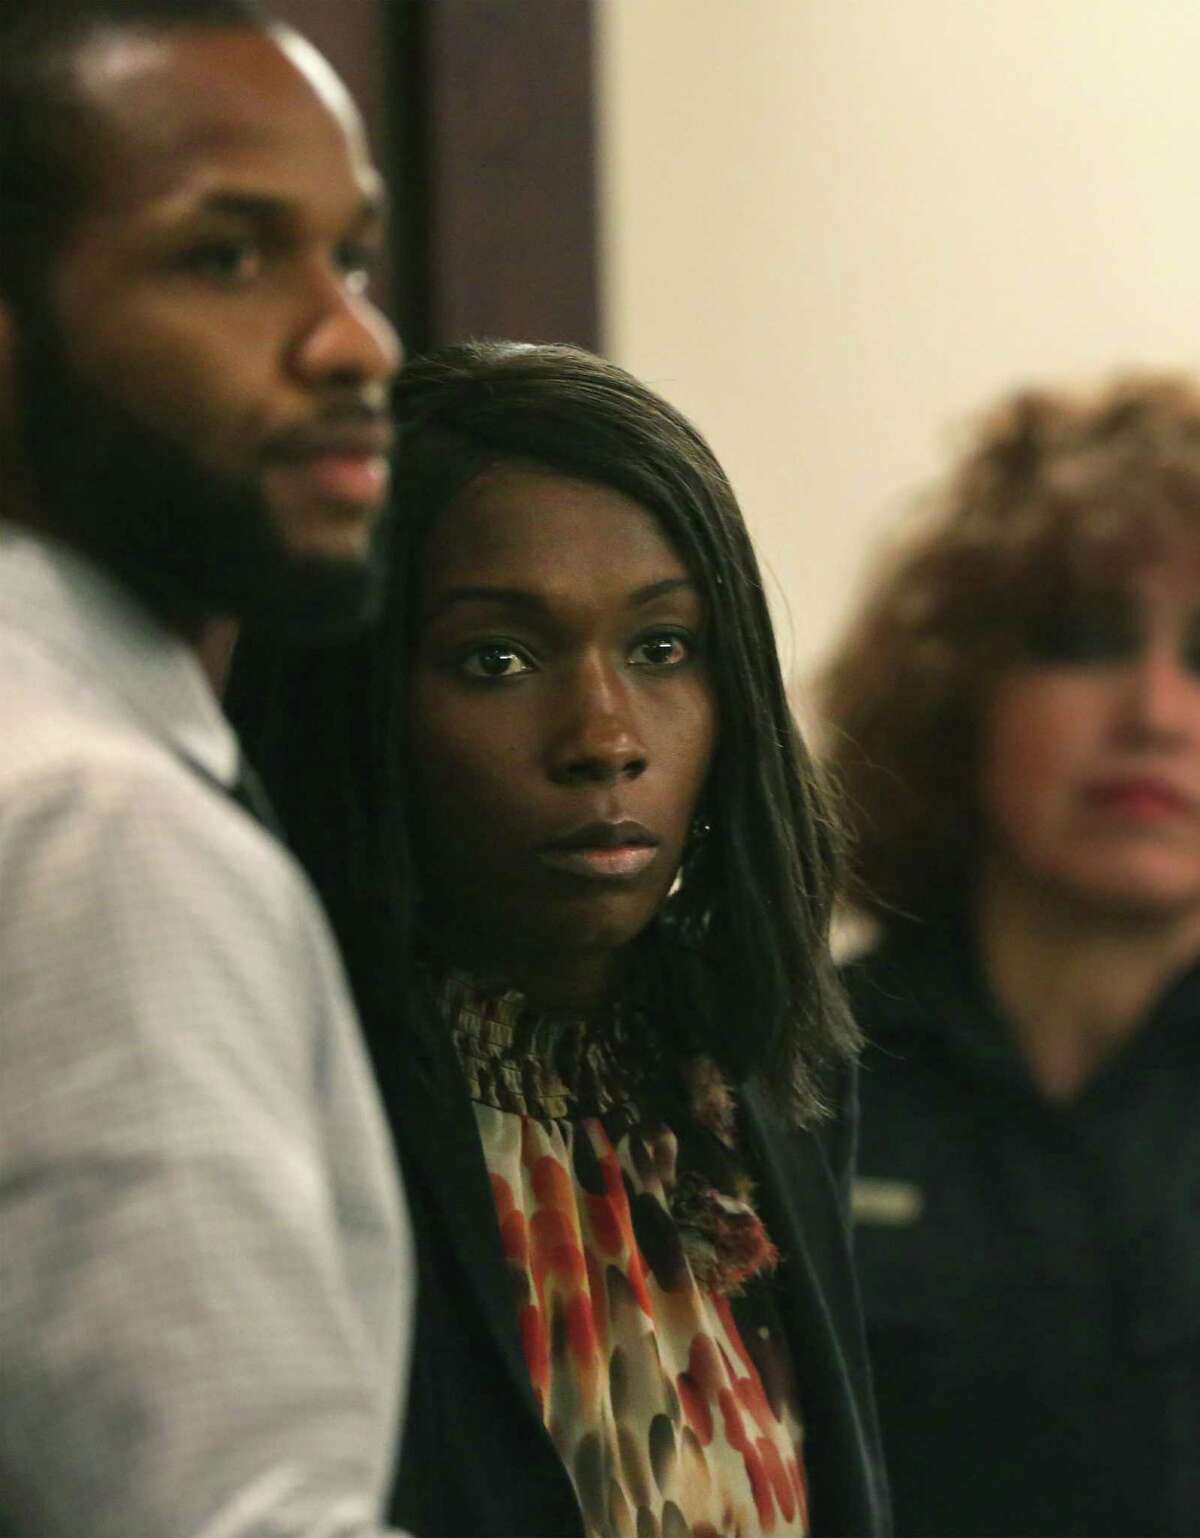 Marquita Johnson, center, and husband Qwalion Busby, left, charged with injury to a child by omission in regard to their son, who died after a severe infection in 2015 appear in the Cadena-Reeves Justice Center, on Tuesday, Feb. 14, 2017. They were found guilty.